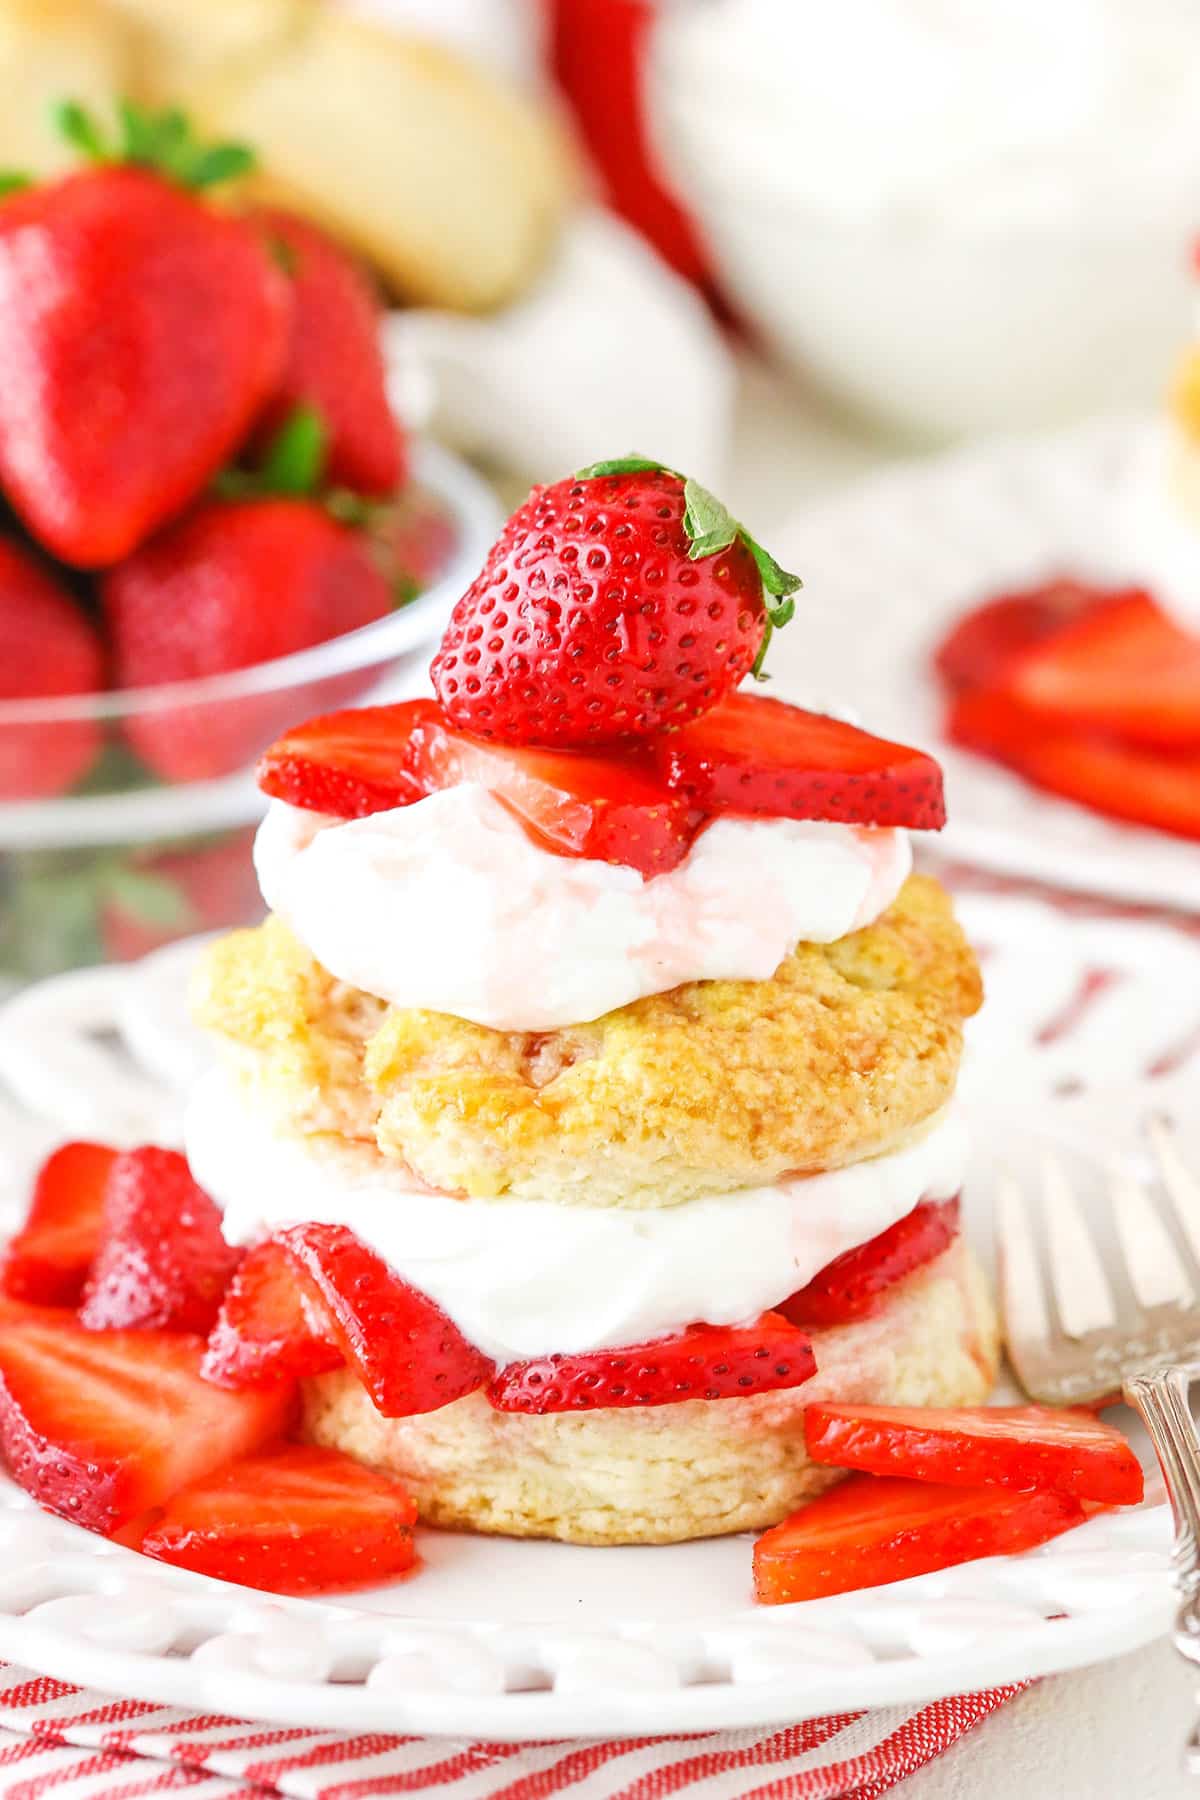 Shortcake biscuits with homemade whipped cream and strawberries.